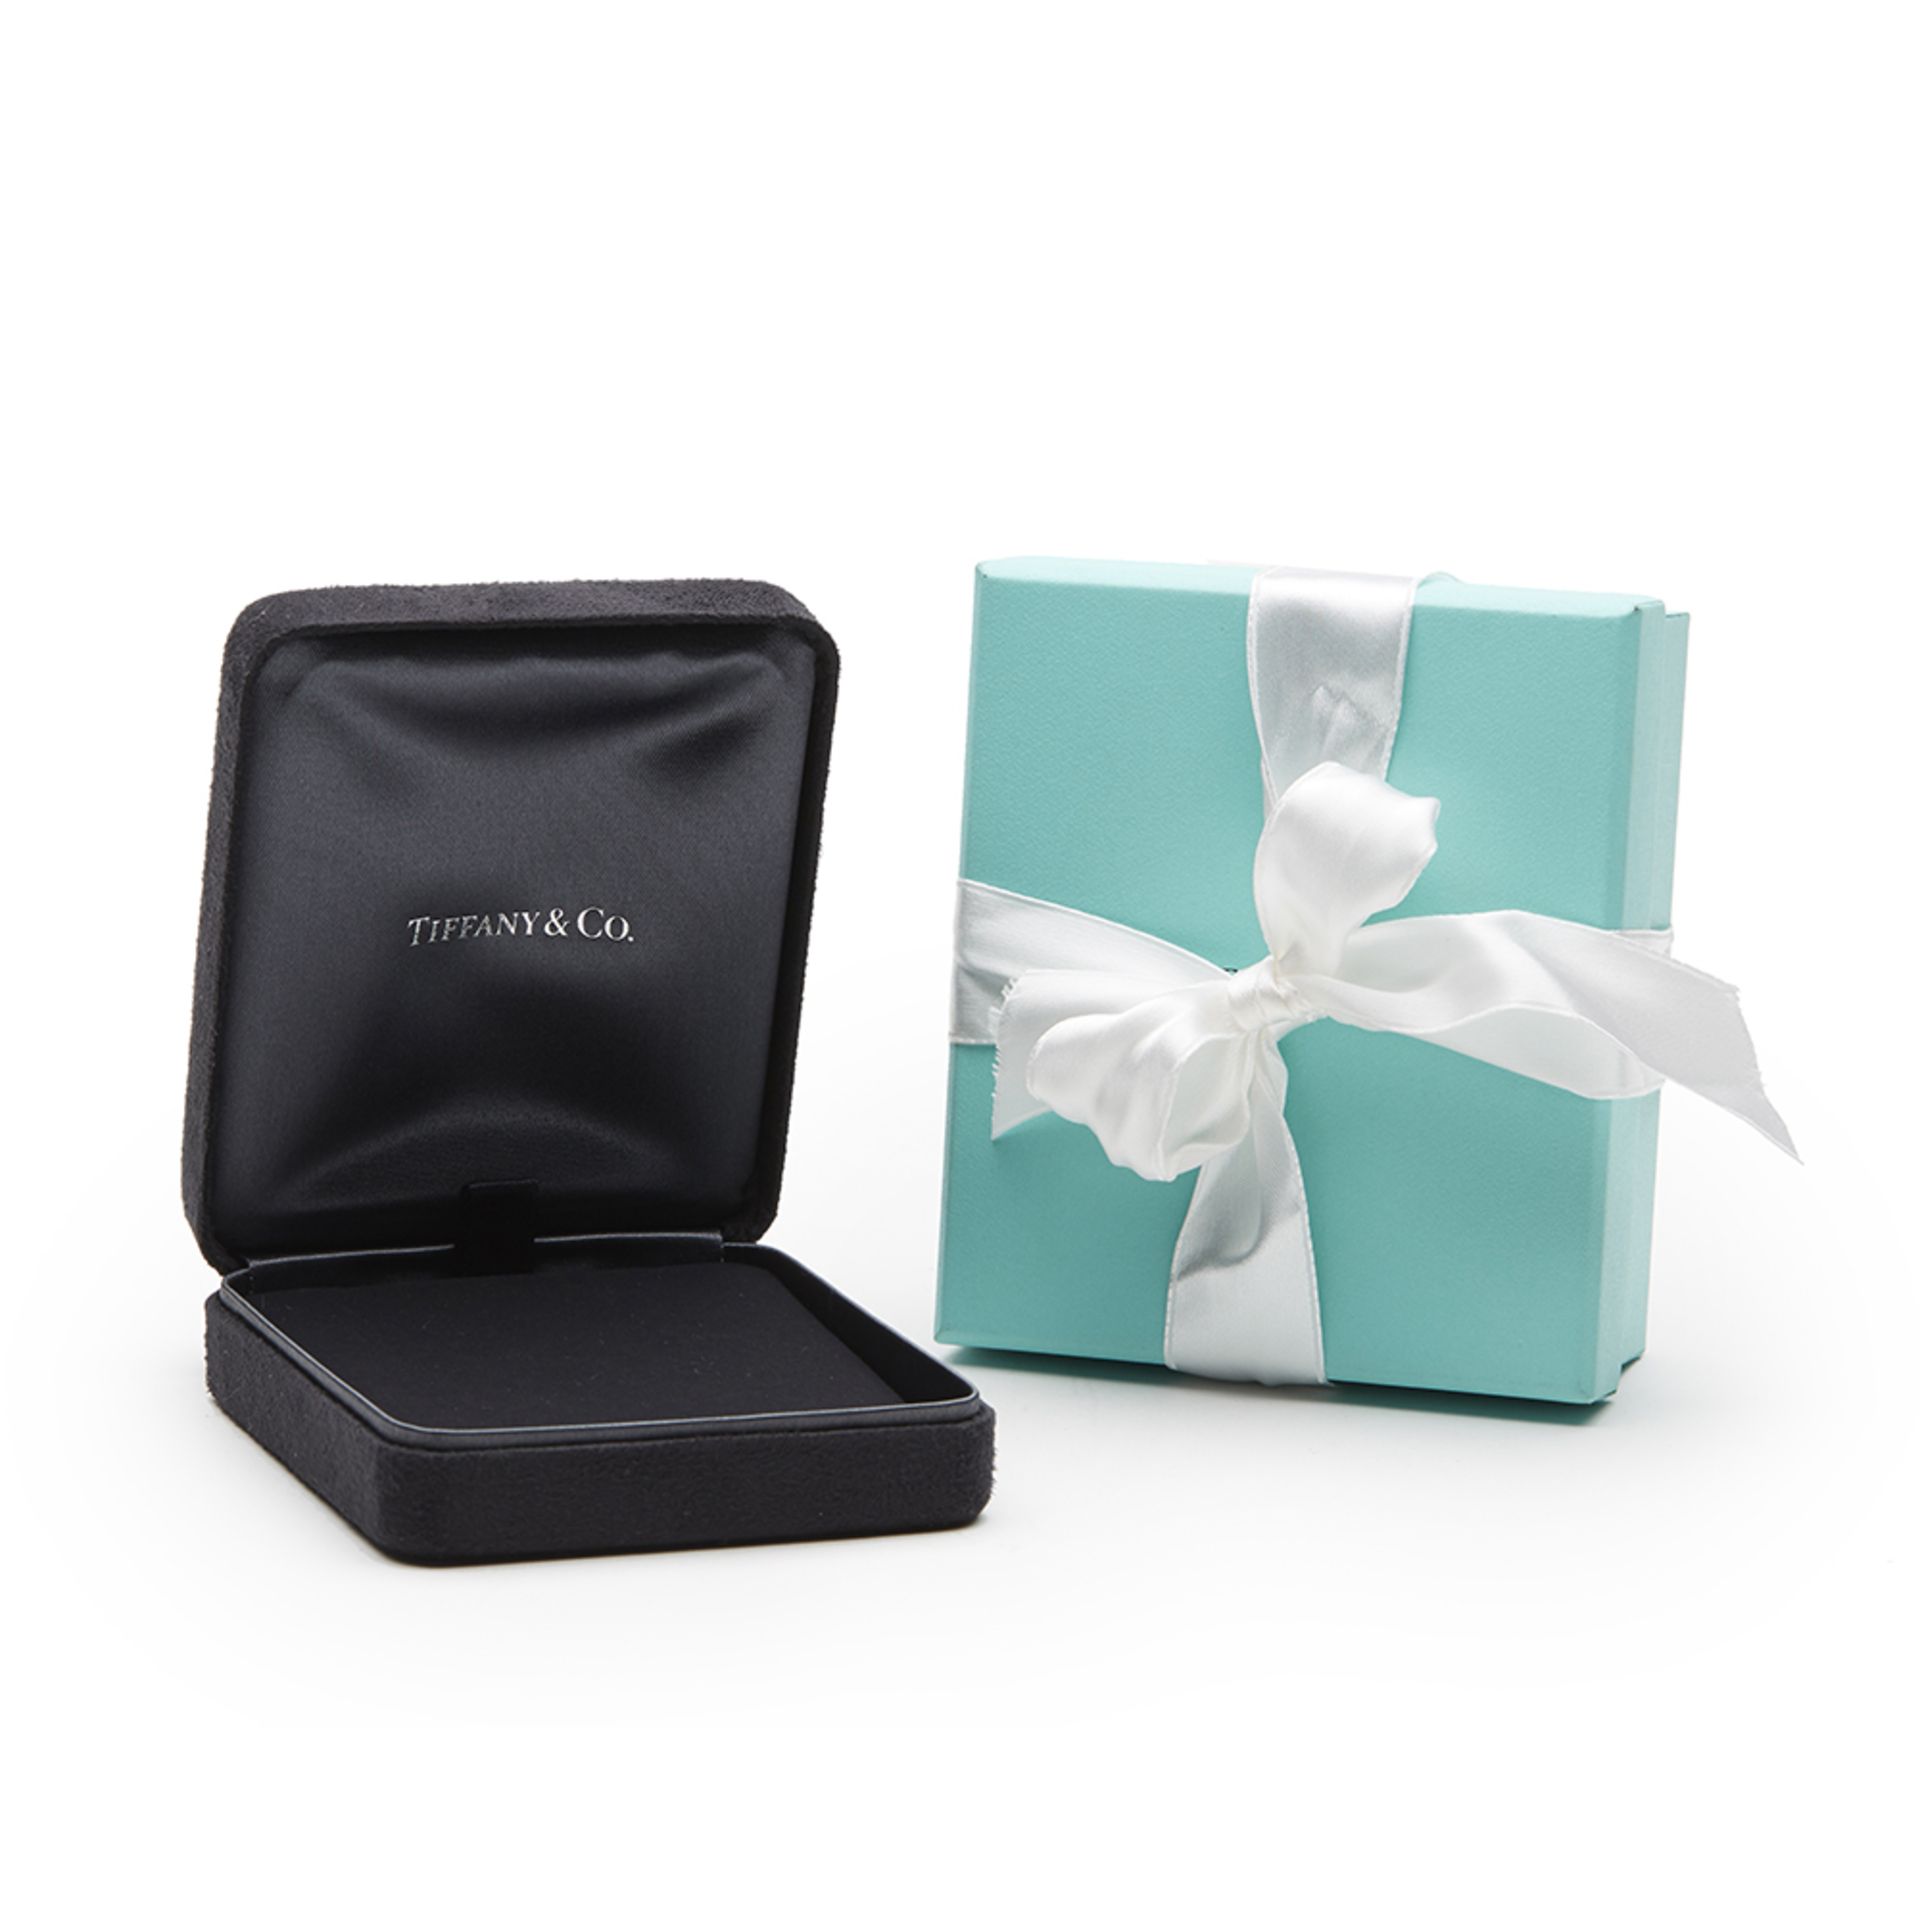 Tiffany & Co. 18k White Gold Diamond Drop Necklace with Box. - Image 6 of 6